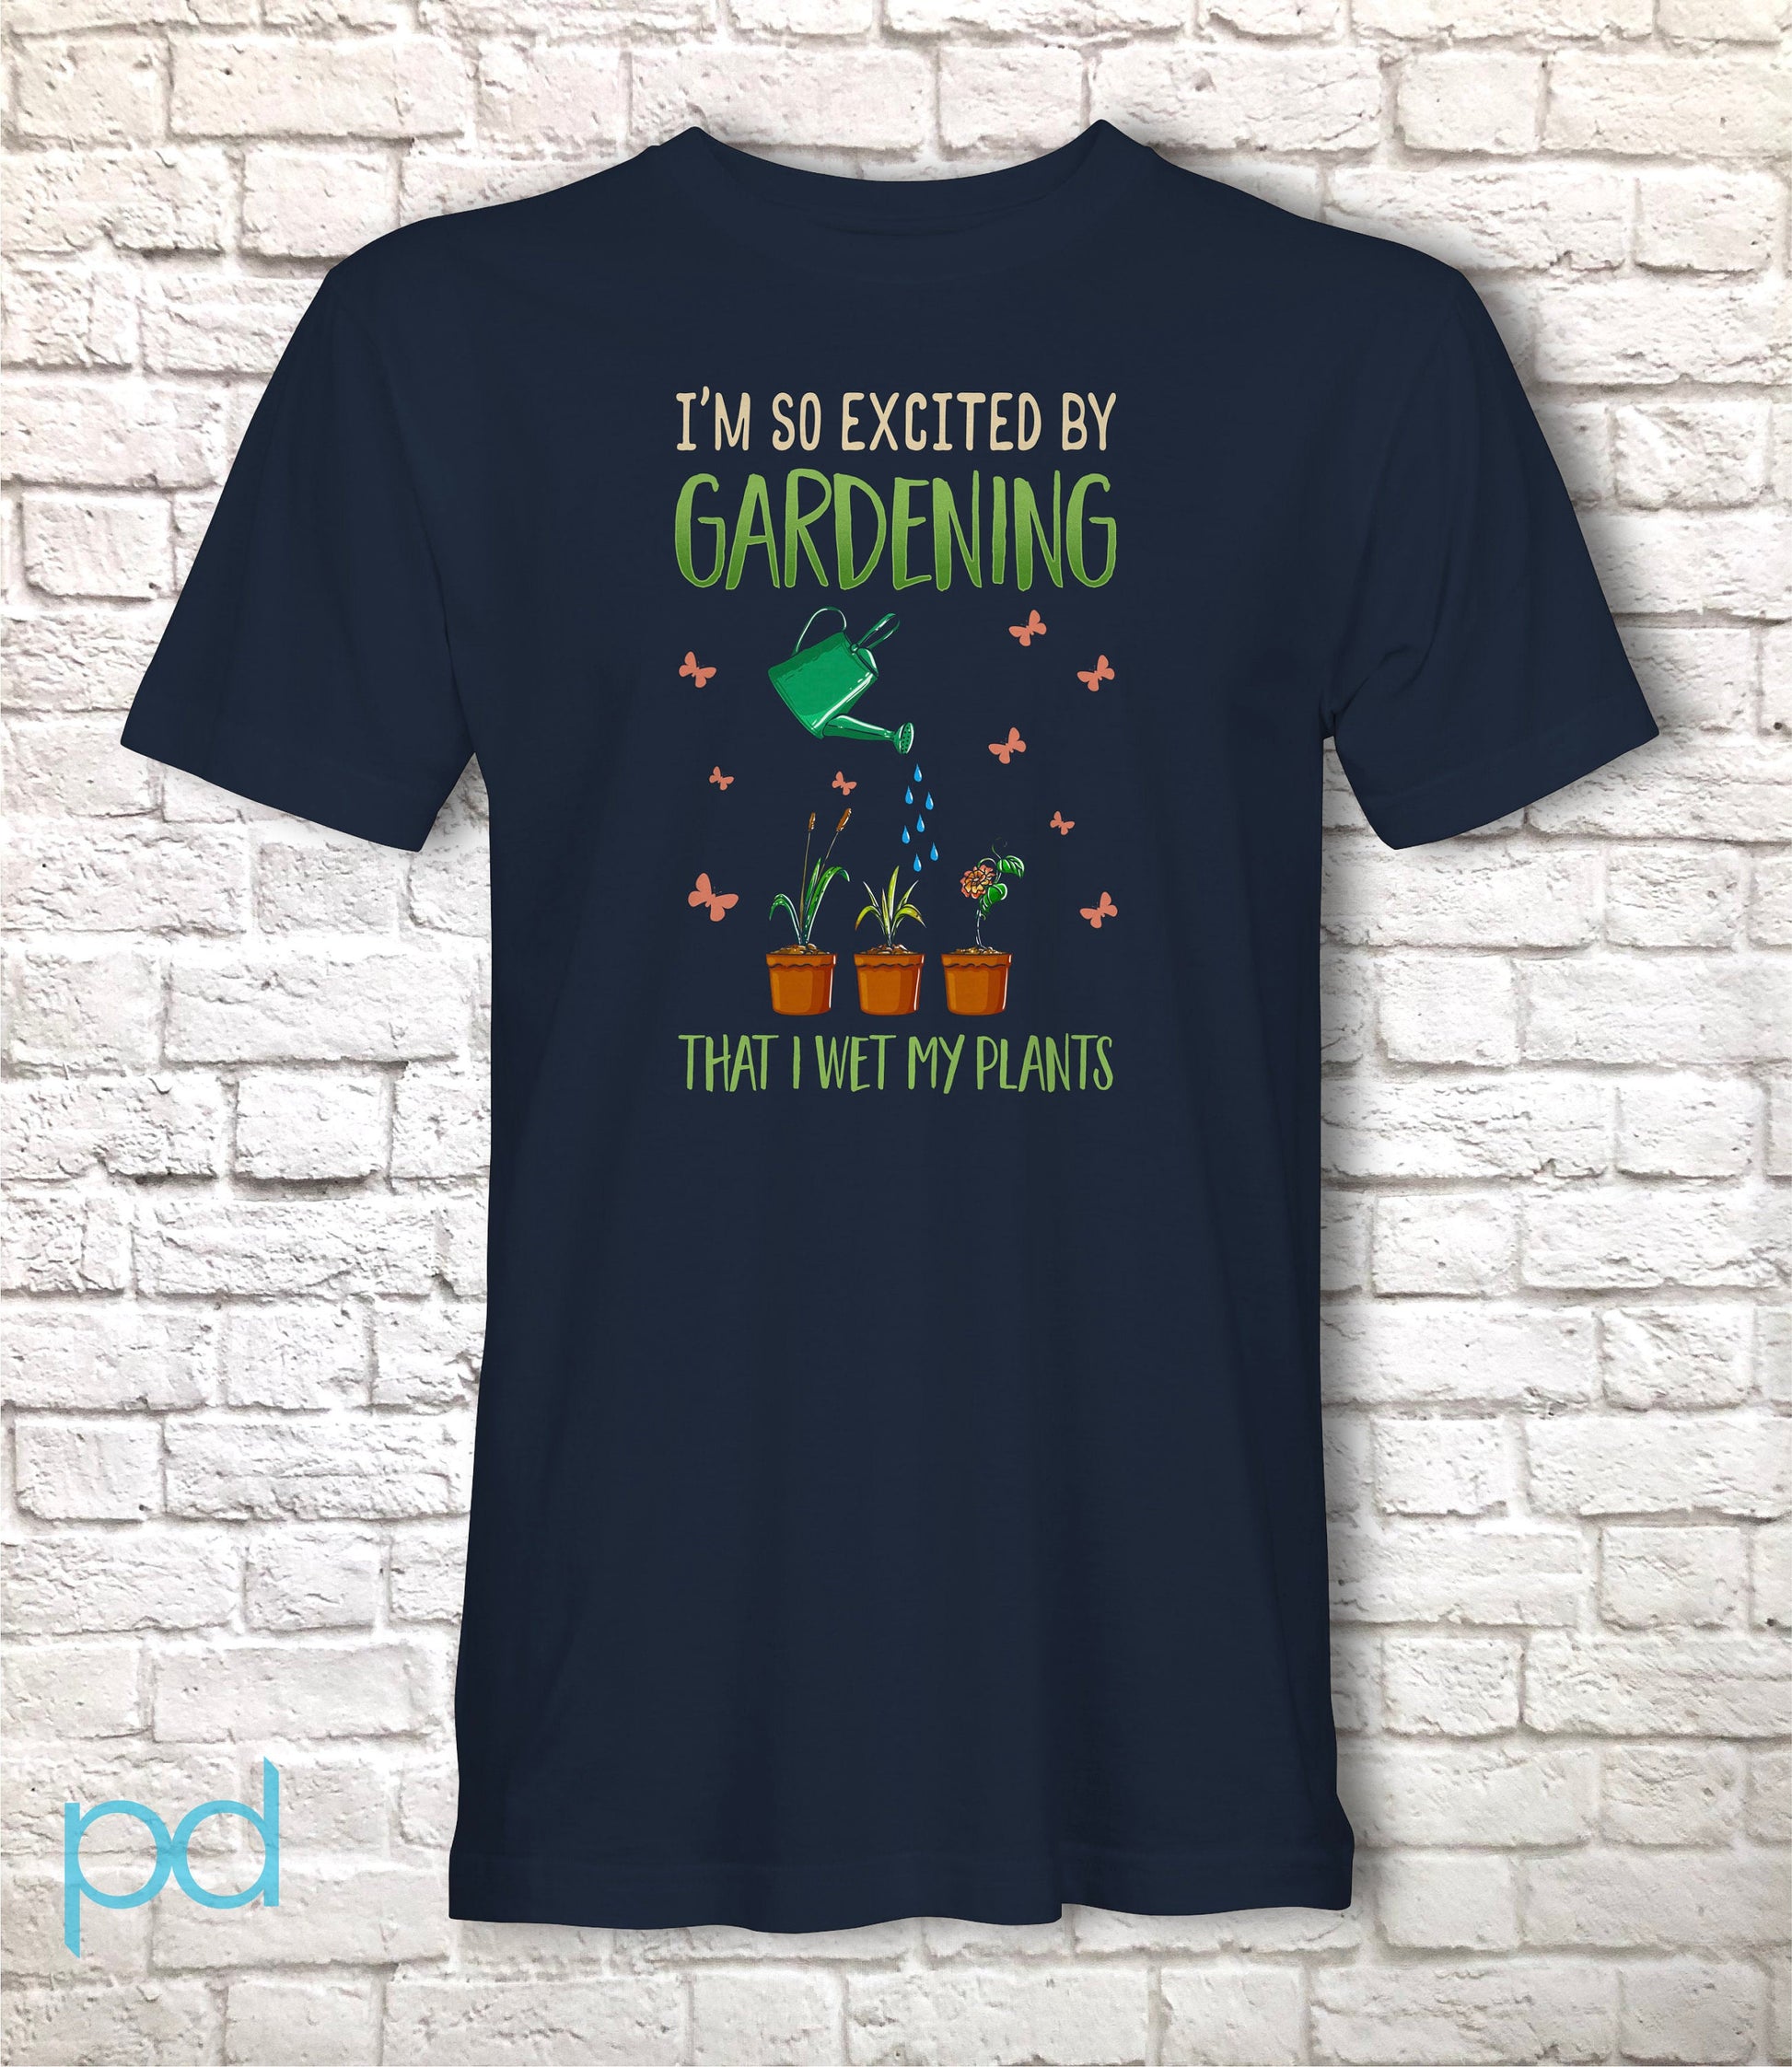 Funny Gardening T-Shirt, I&#39;m So Excited By Gardening I Wet My Plants Pun Meme Gift Idea, Humorous Watering Plants Tee Shirt T Top